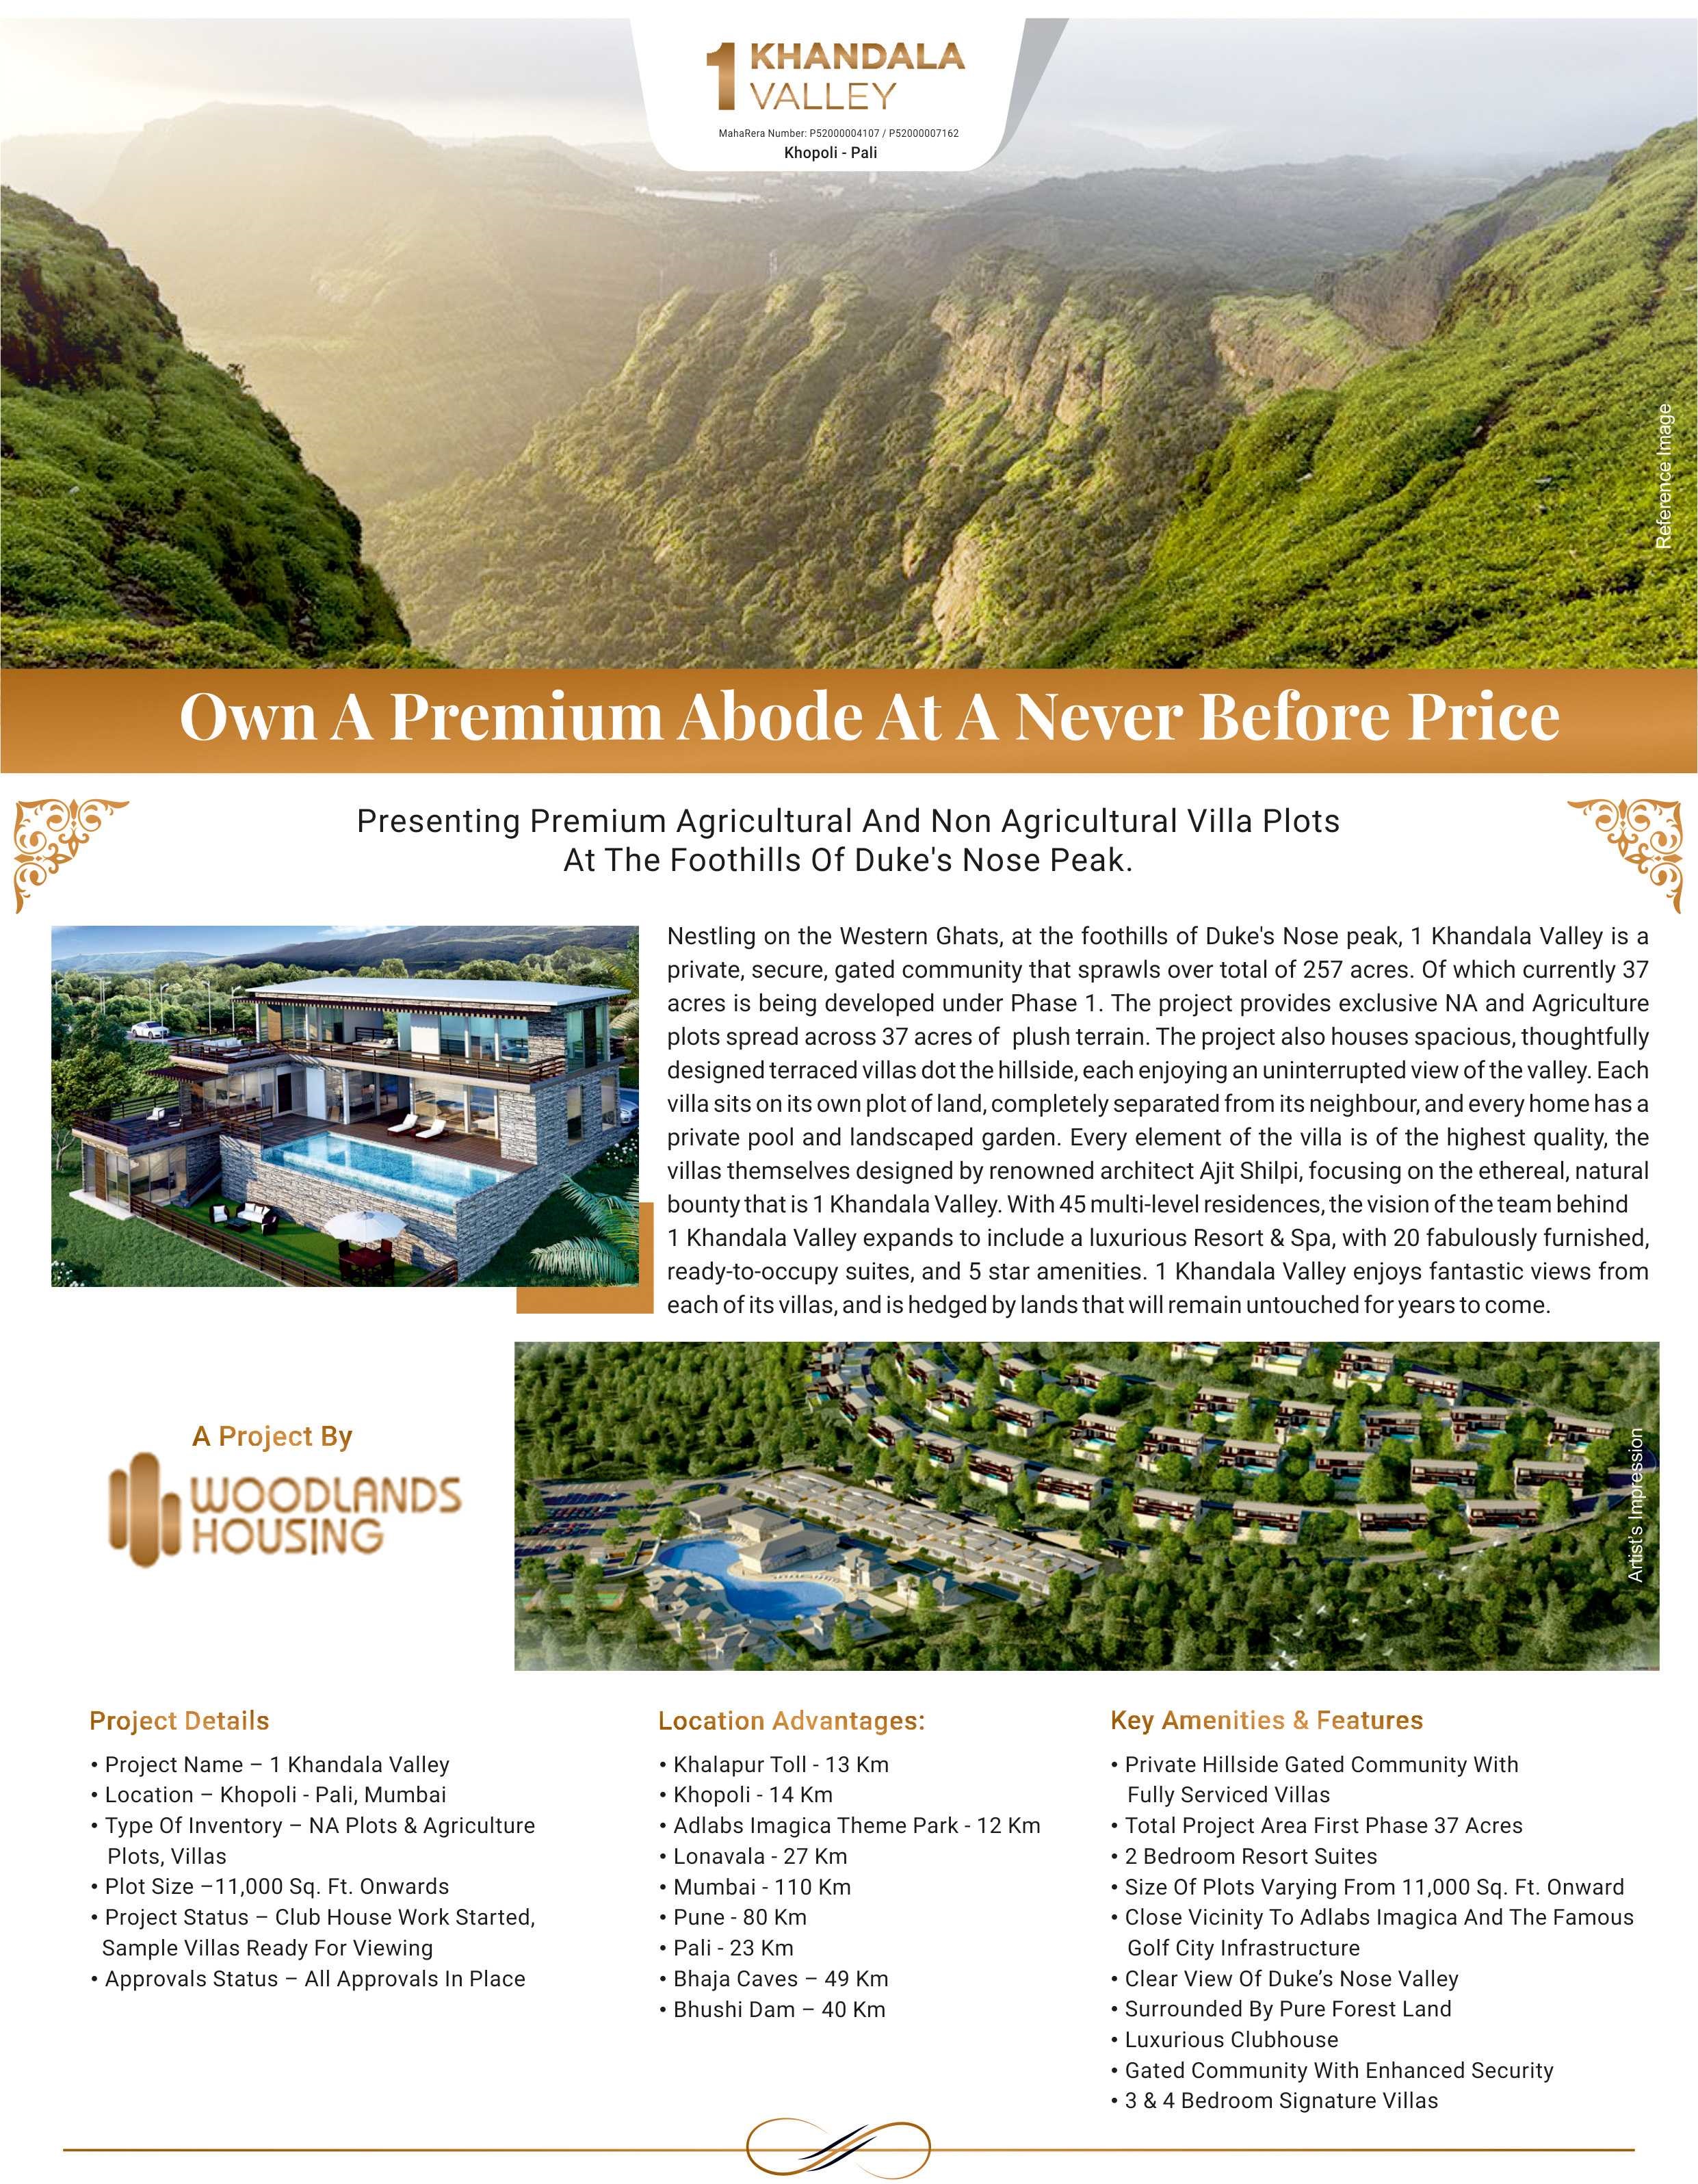 Own a premium abode at a never before price at Woodlands 1 Khandala Valley in Mumbai Update